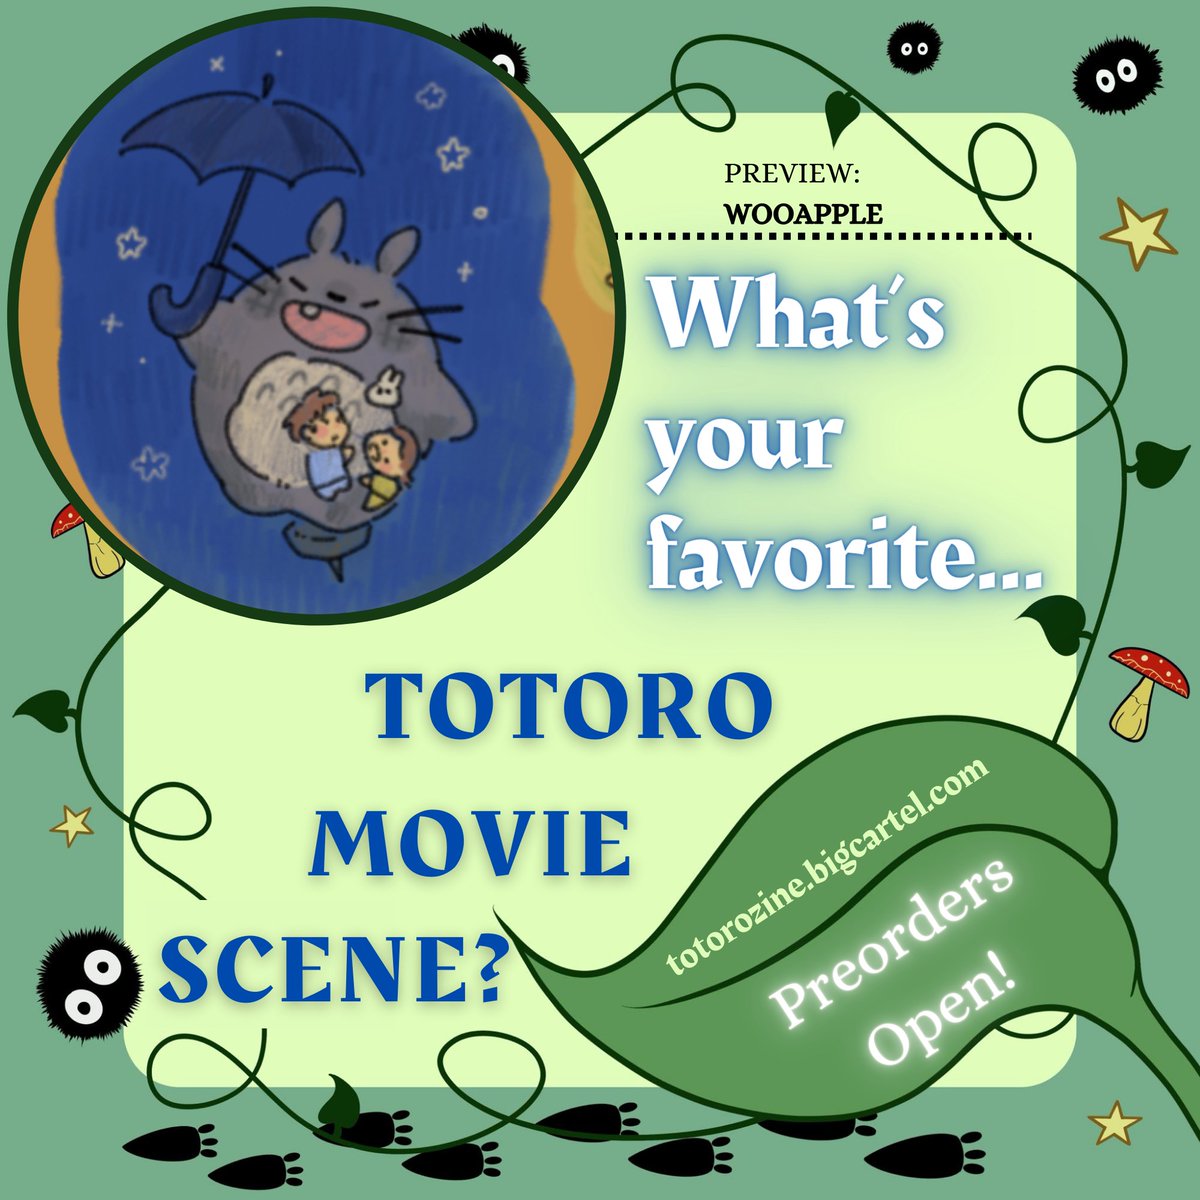 (RTs 💚)

It's Totoro Question Time! Let us know in the replies...

What's your favourite Totoro movie scene? 👀💙

#Totoro #MyNeighborTotoro #StudioGhibli